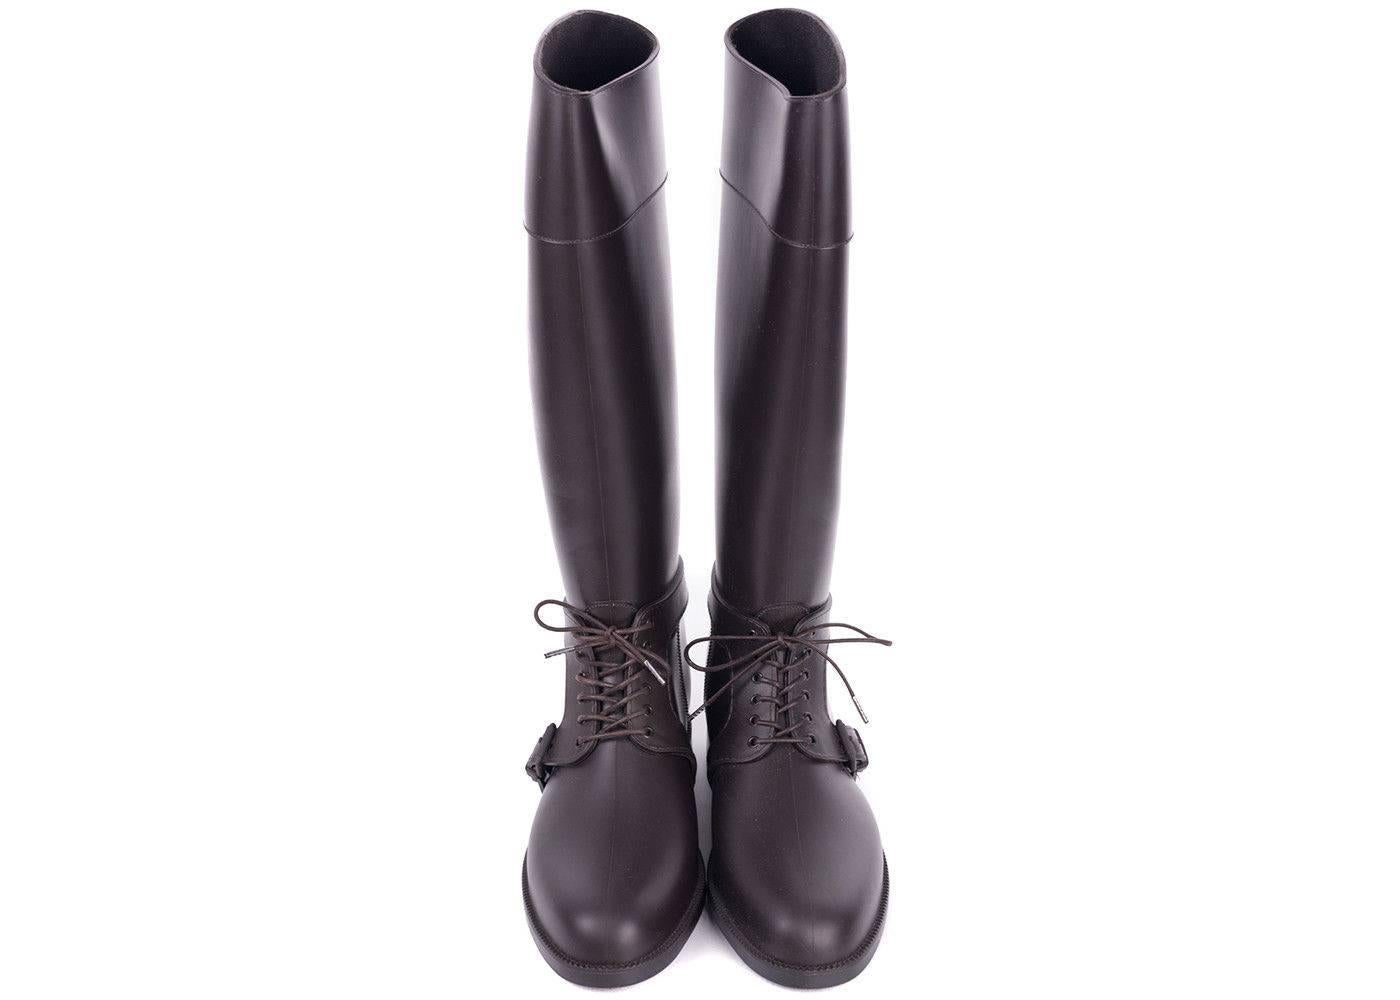 Step into the rain with Equestrian confidence in your Givenchy Rain Boots. These durable rubber boots feature tonal laces,  wrap around harness belt, and knee-high length. These shoes can be paired with denim or and all black outfit for your